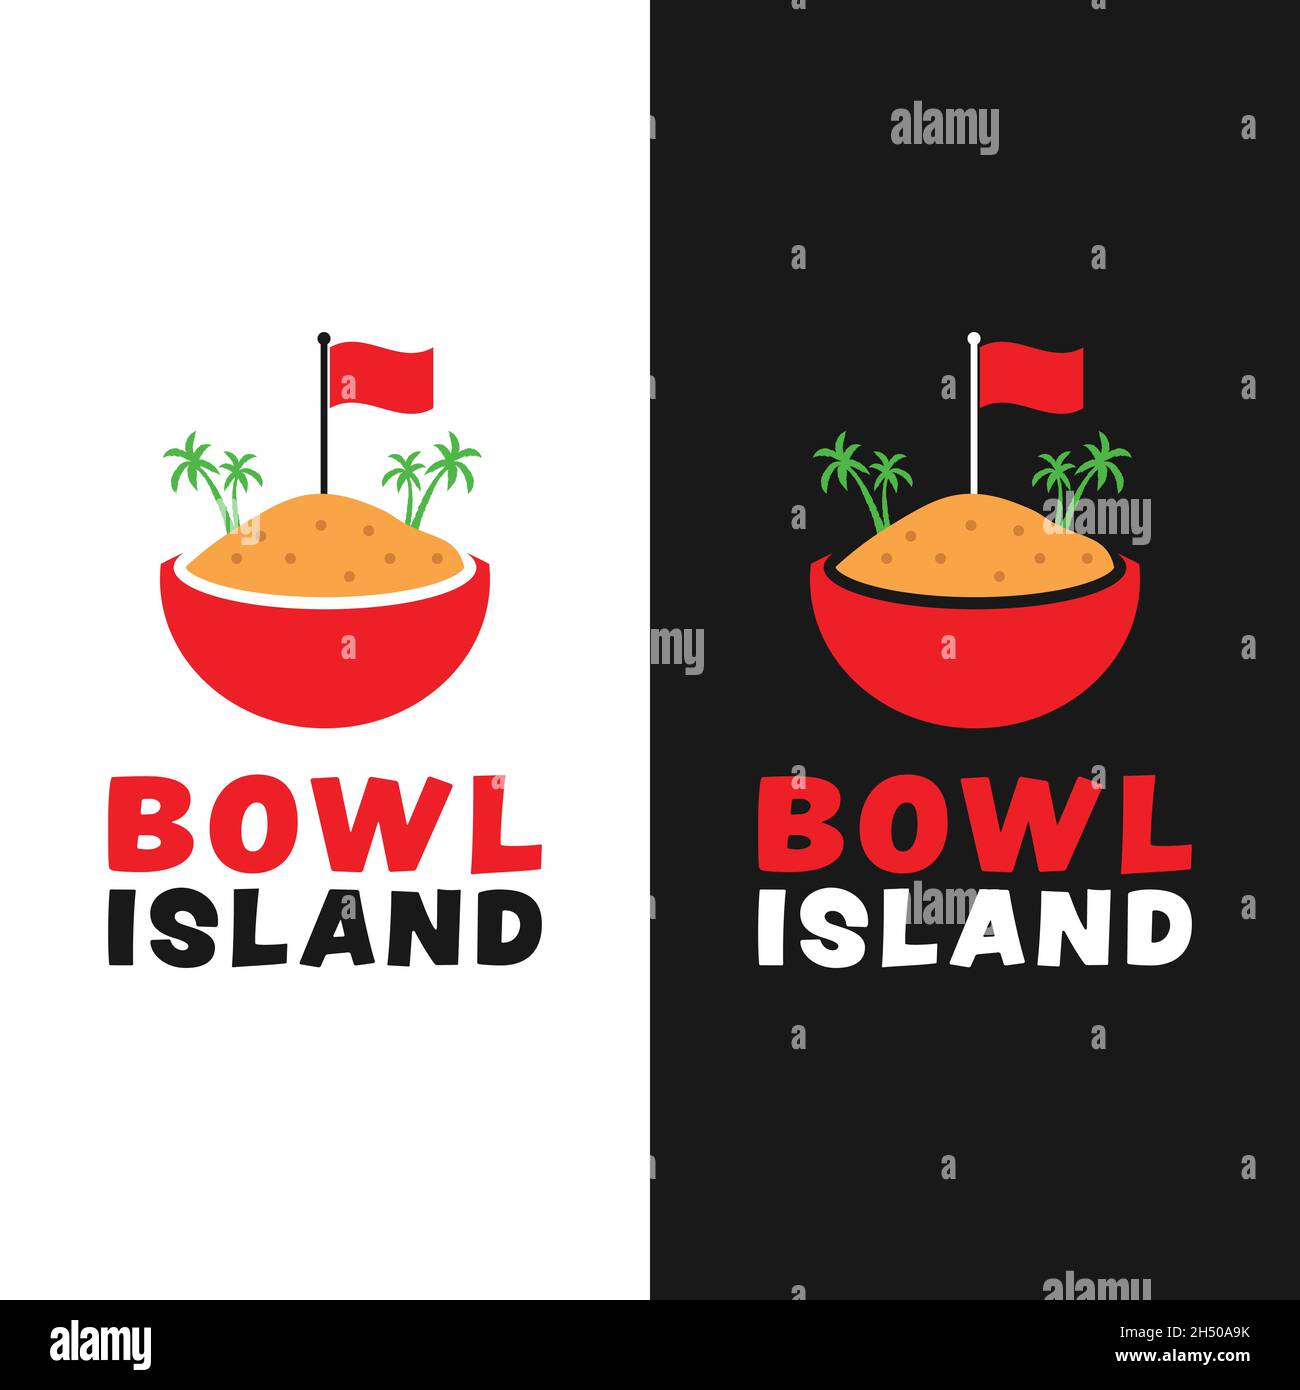 Island Illustration in a Bowl Logo Design Template. Bowl with Fried Rice or Beach Sand with Red Flag and Palm Tree. Suitable for Restaurant Cafe Etc. Stock Vector